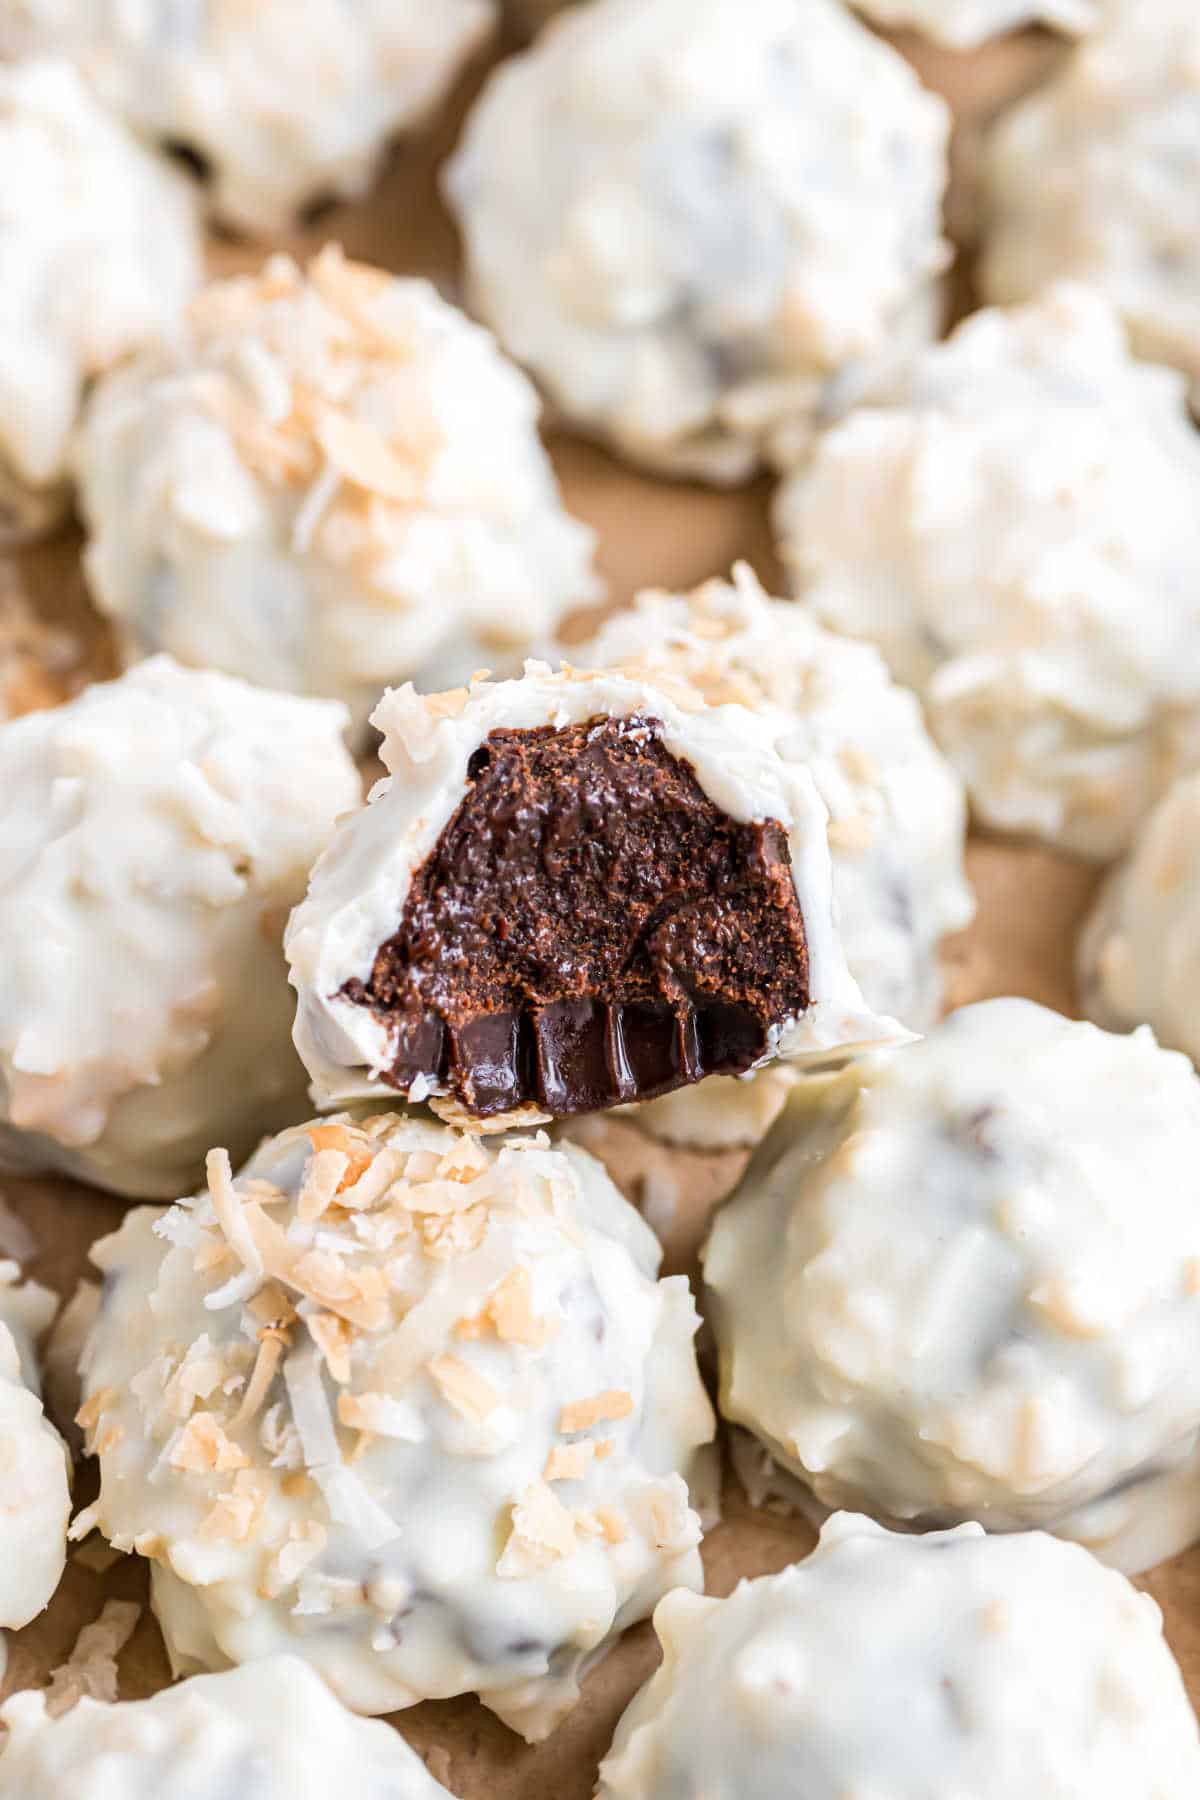 Coconut truffles with a dark chocolate filling.